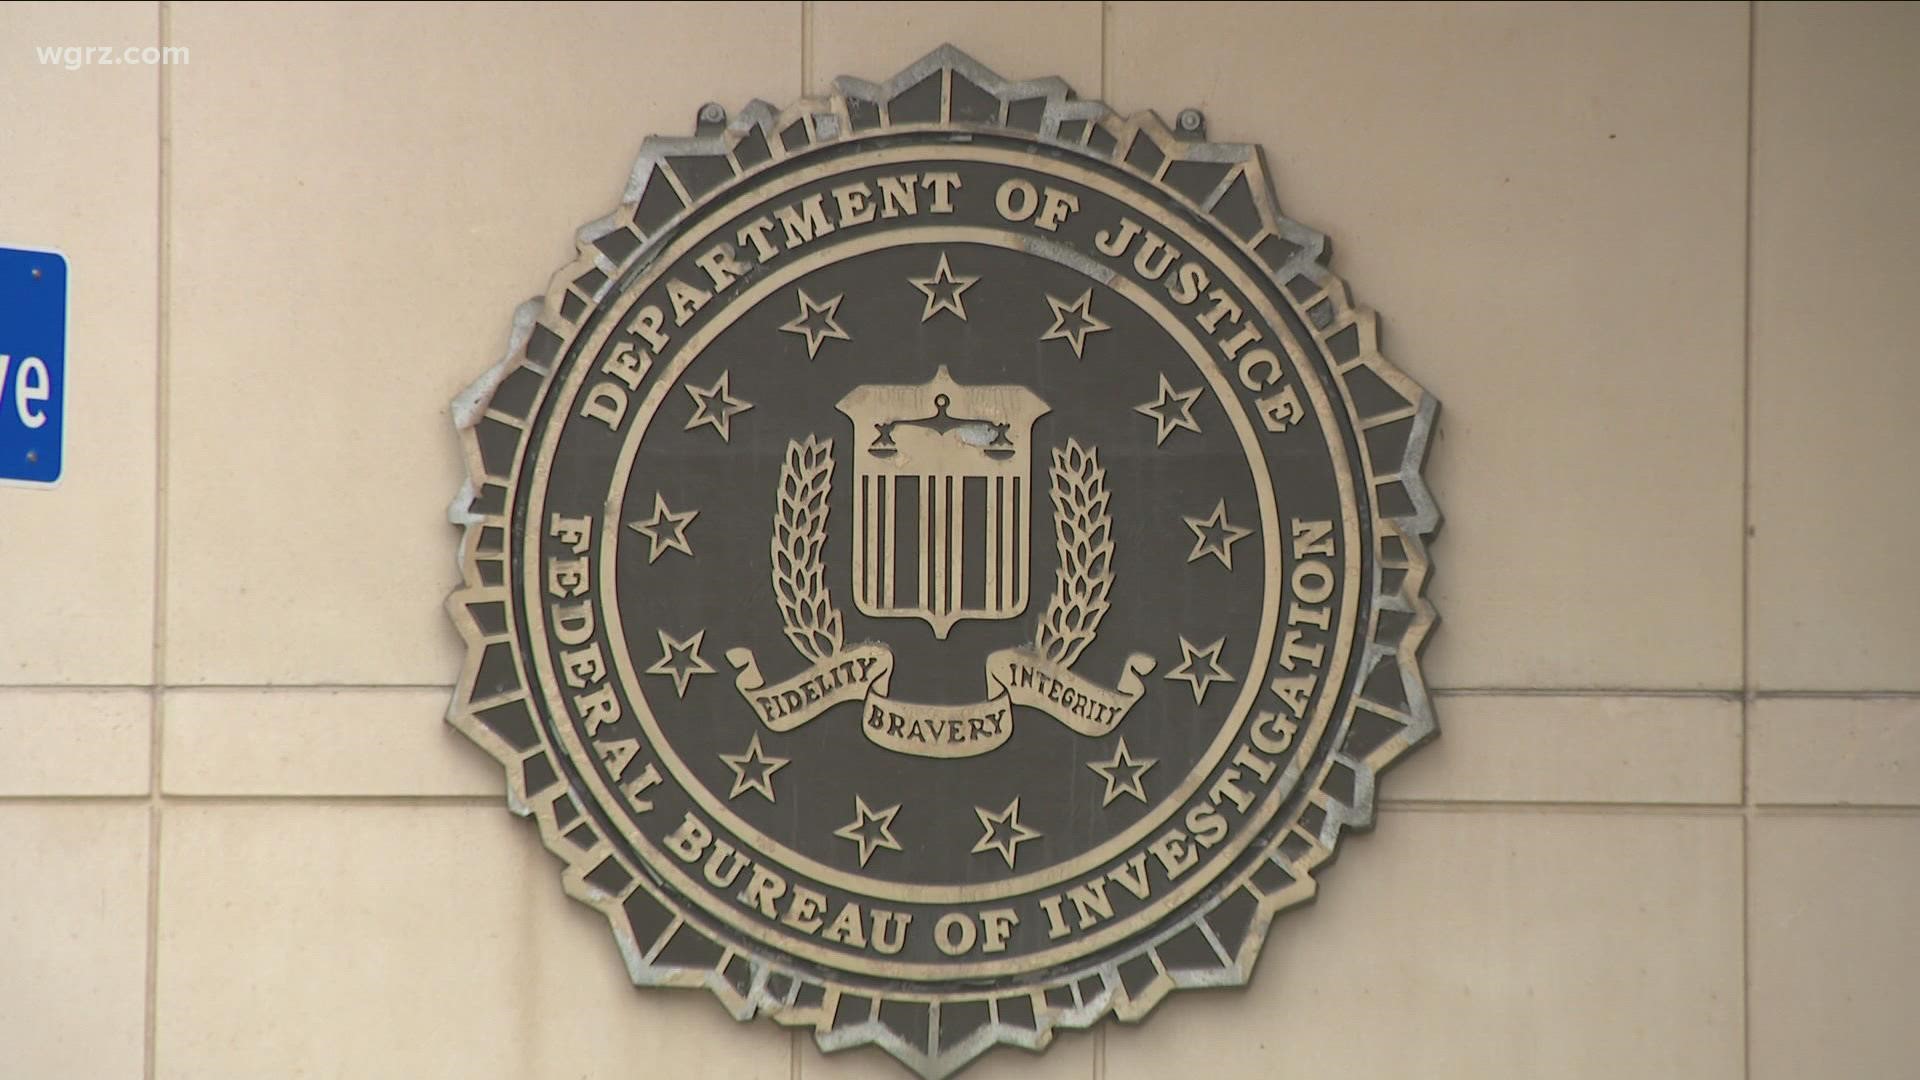 A man was arrested and charged for assaulting a federal officer after attempting to enter the FBI's Buffalo Division main office around 4 p.m. Tuesday.